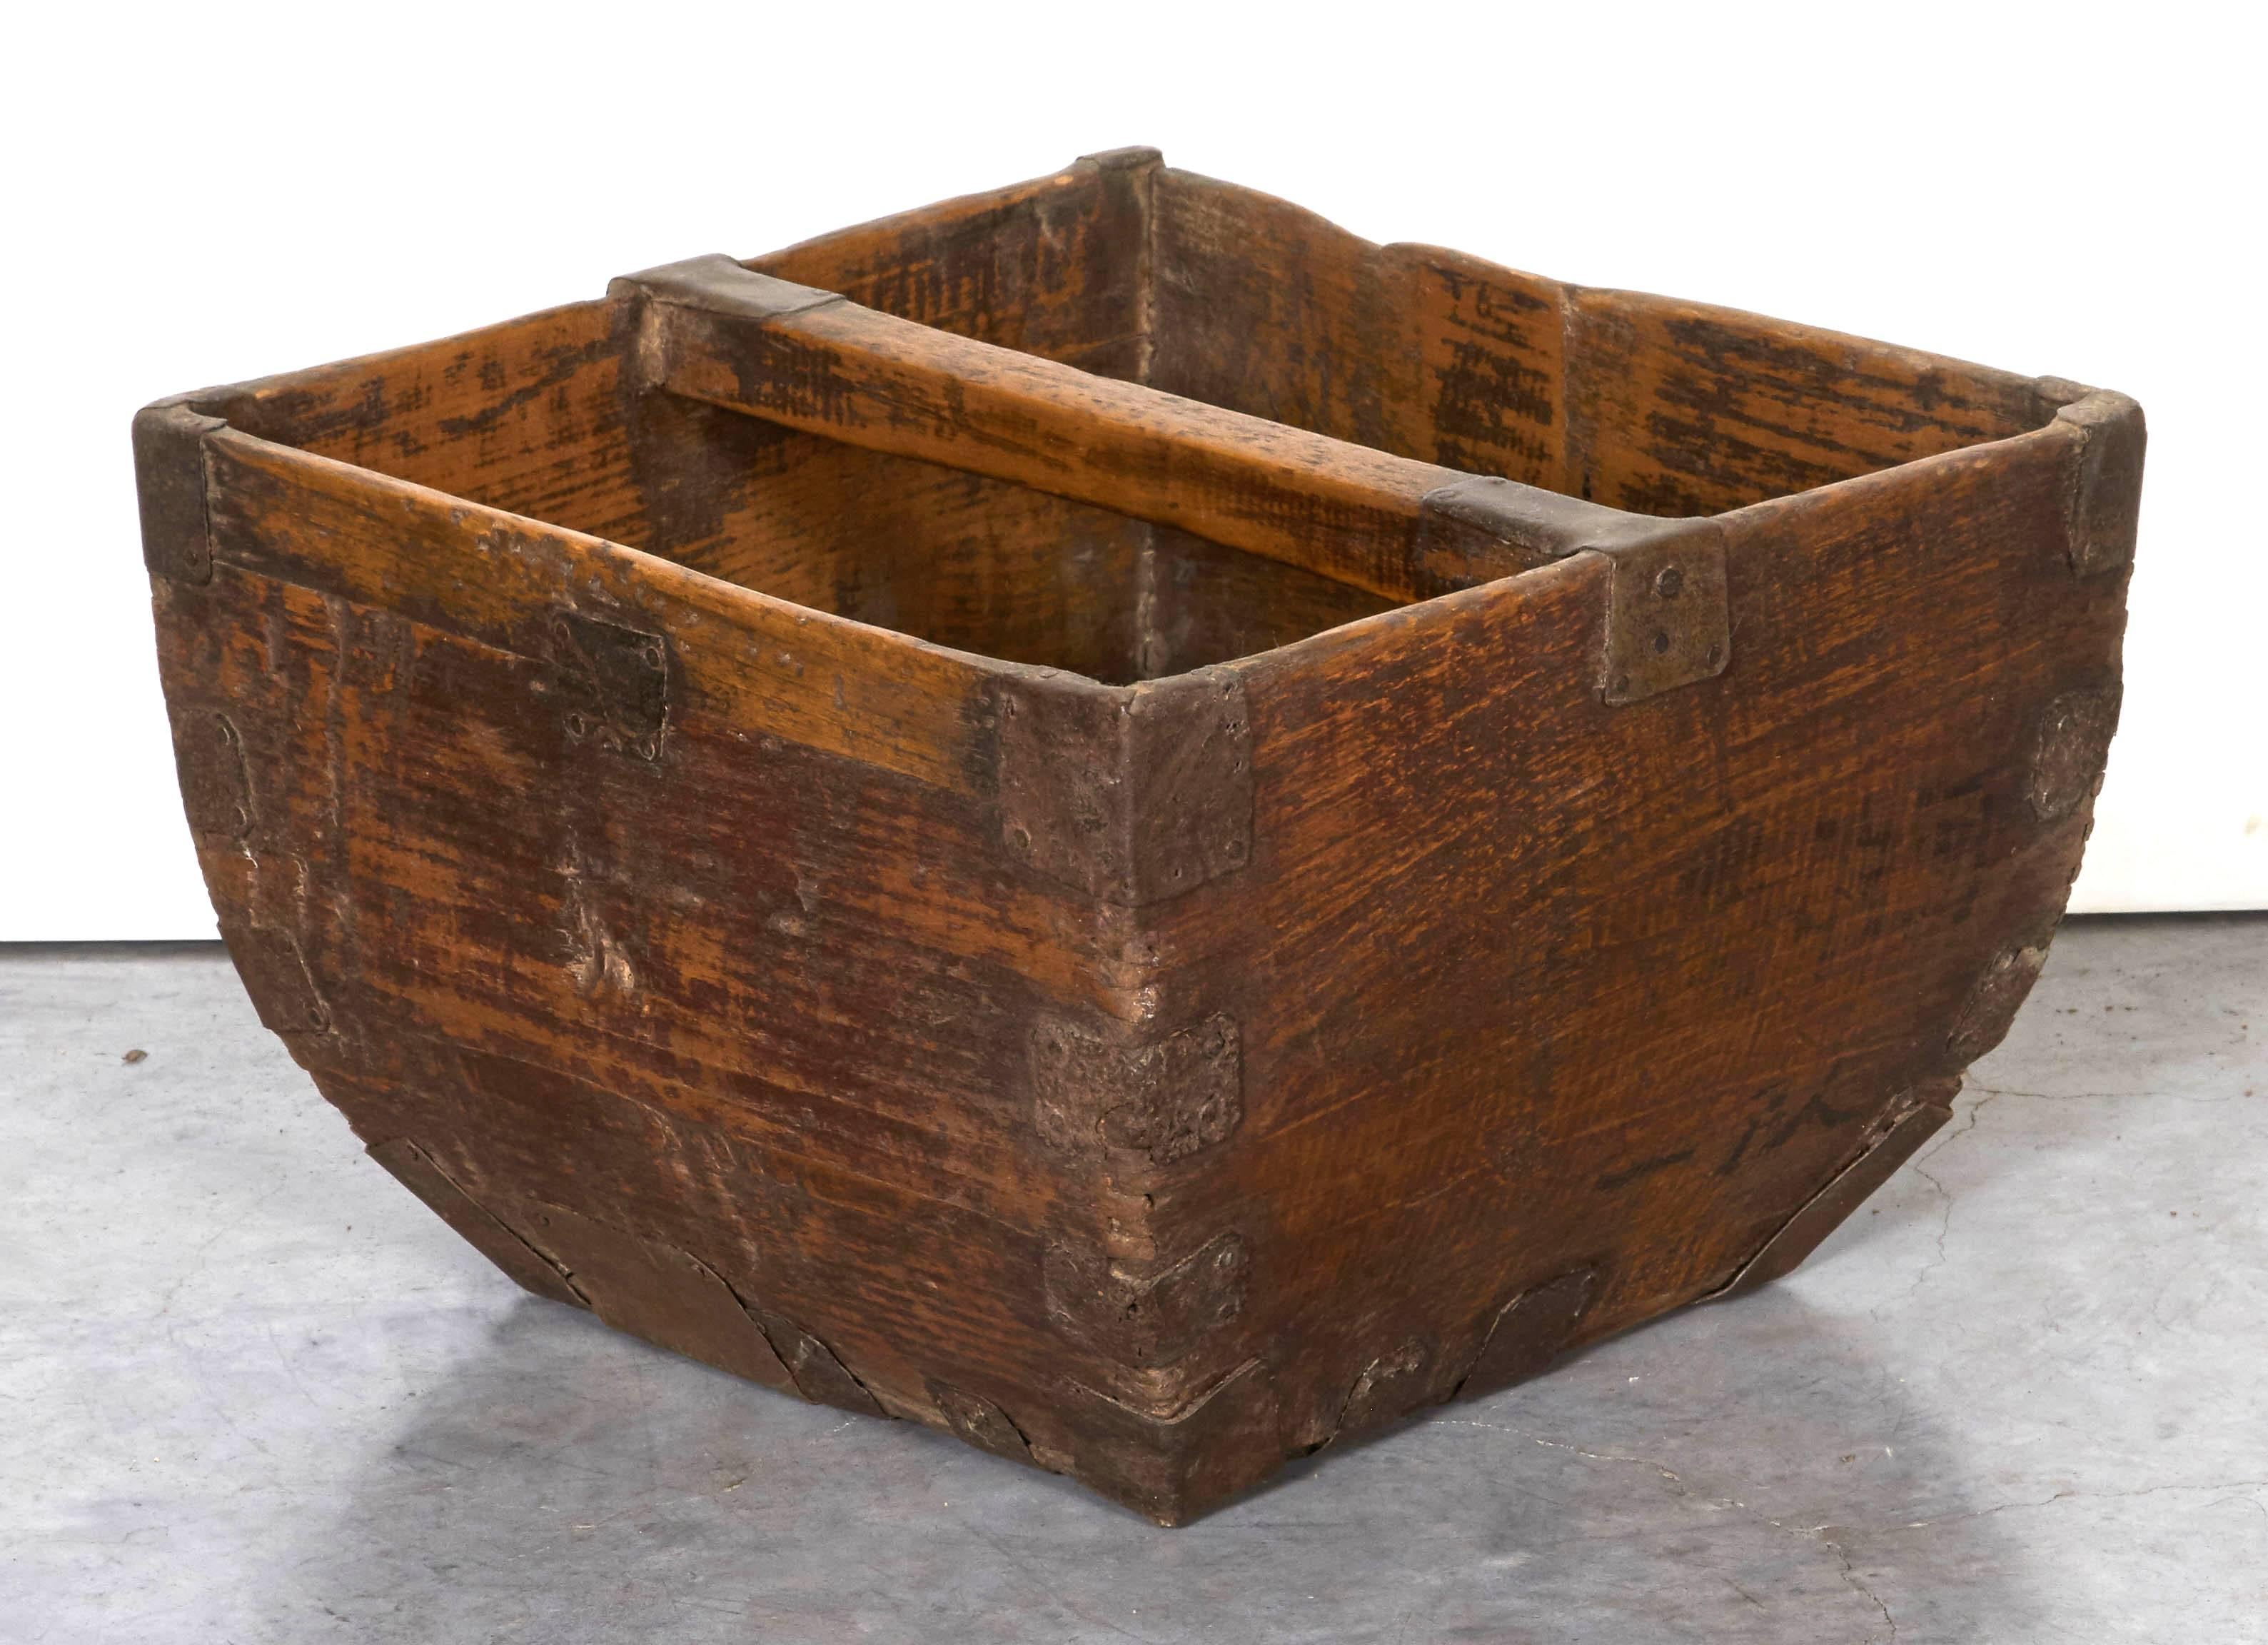 A rustic antique Chinese rice measure basket with beautiful patina and original metal hardware. Not just a beautiful object, but a very functional box for mail, magazines, or in the entry way for flip flops or dog leashes and toys. From Shandong